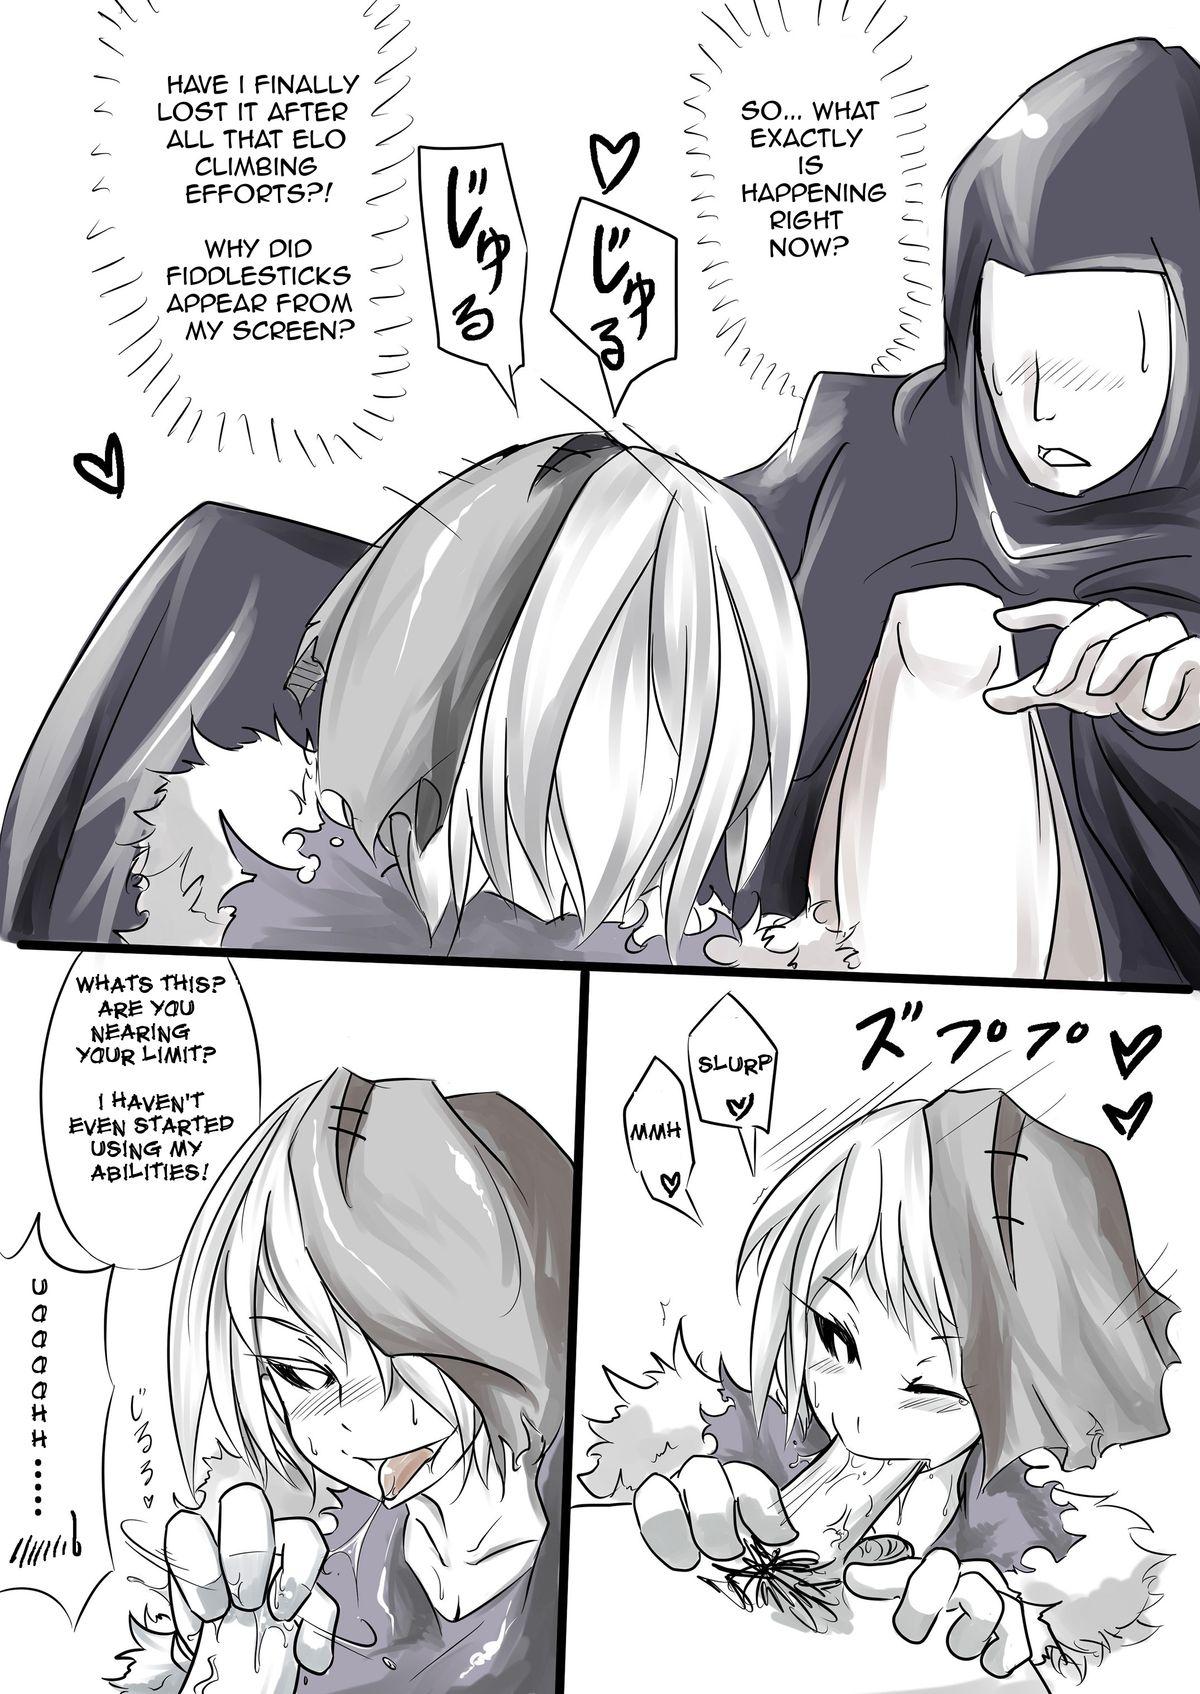 Groupsex I FEEL YOUR FEAR - League of legends Footjob - Page 7